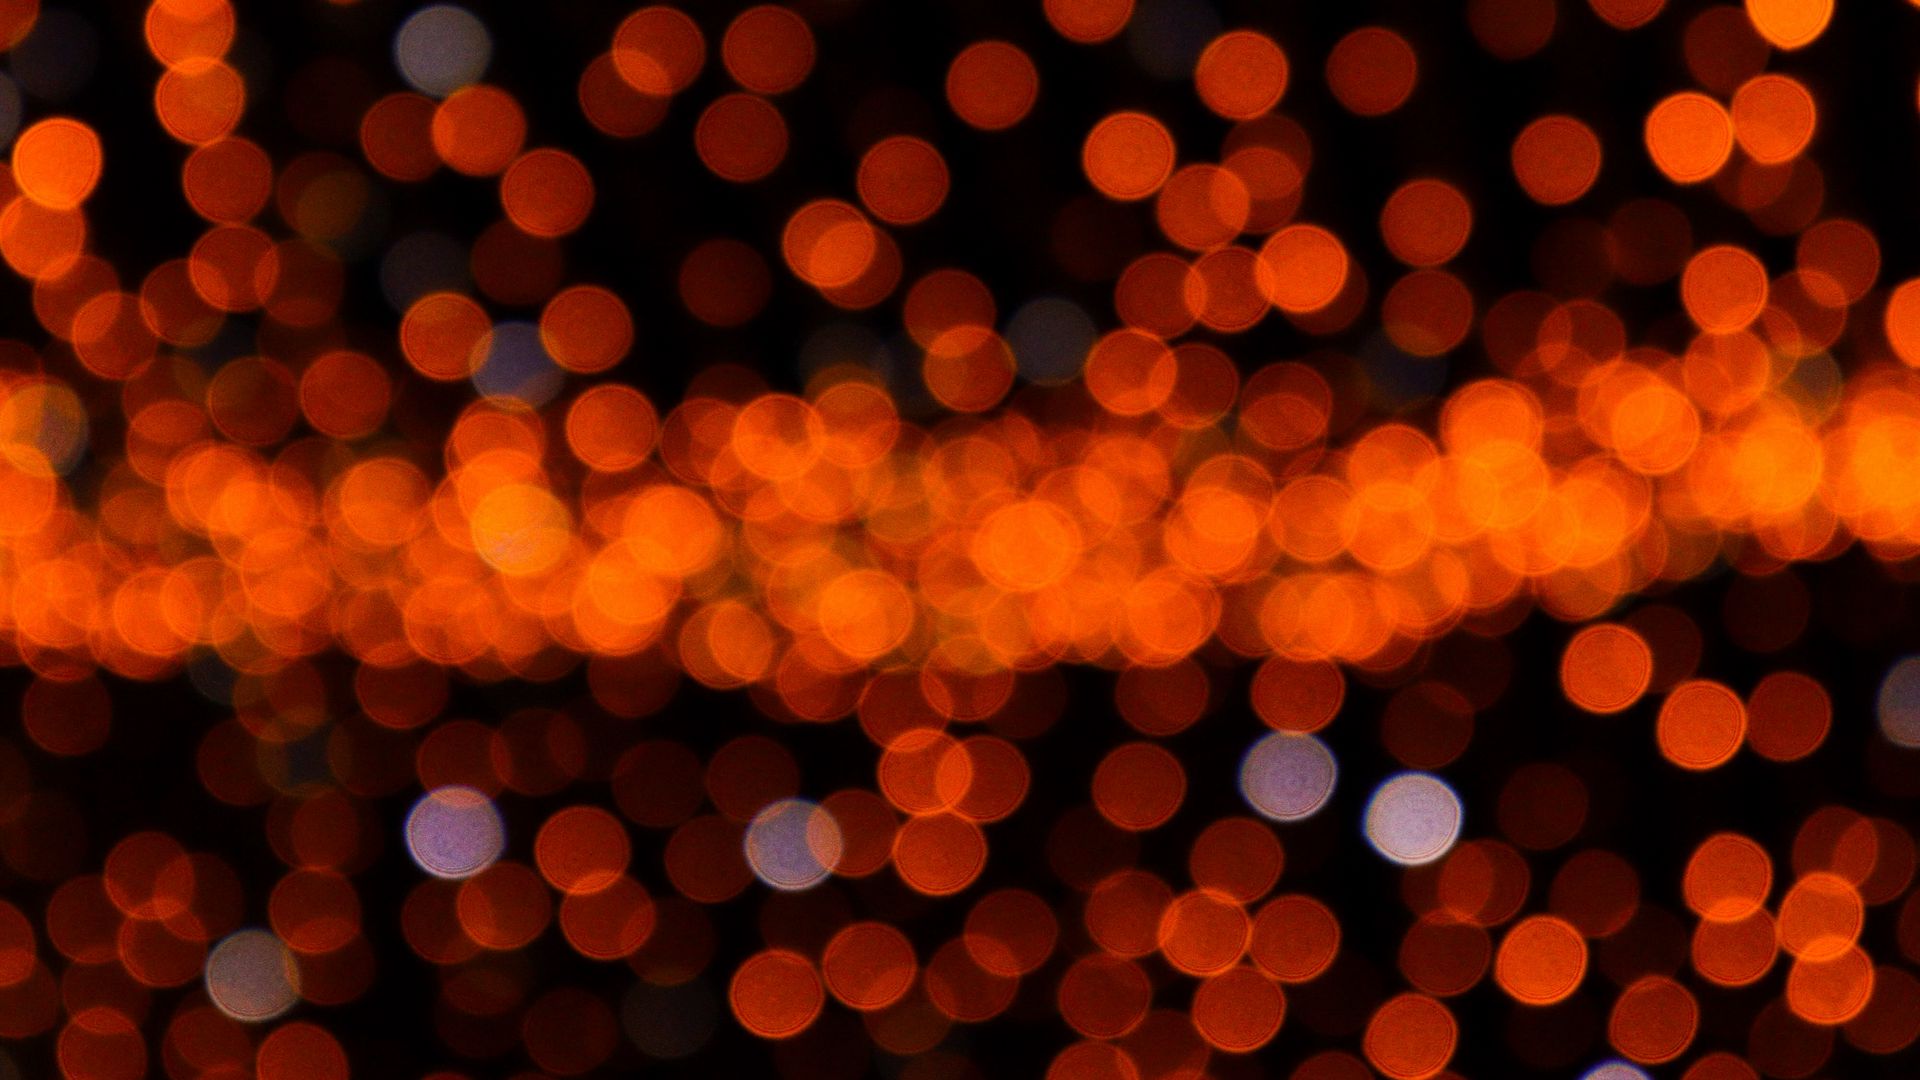 Download wallpaper 1920x1080 flare, bokeh, lights, blur, abstraction full hd, hdtv, fhd, 1080p HD background